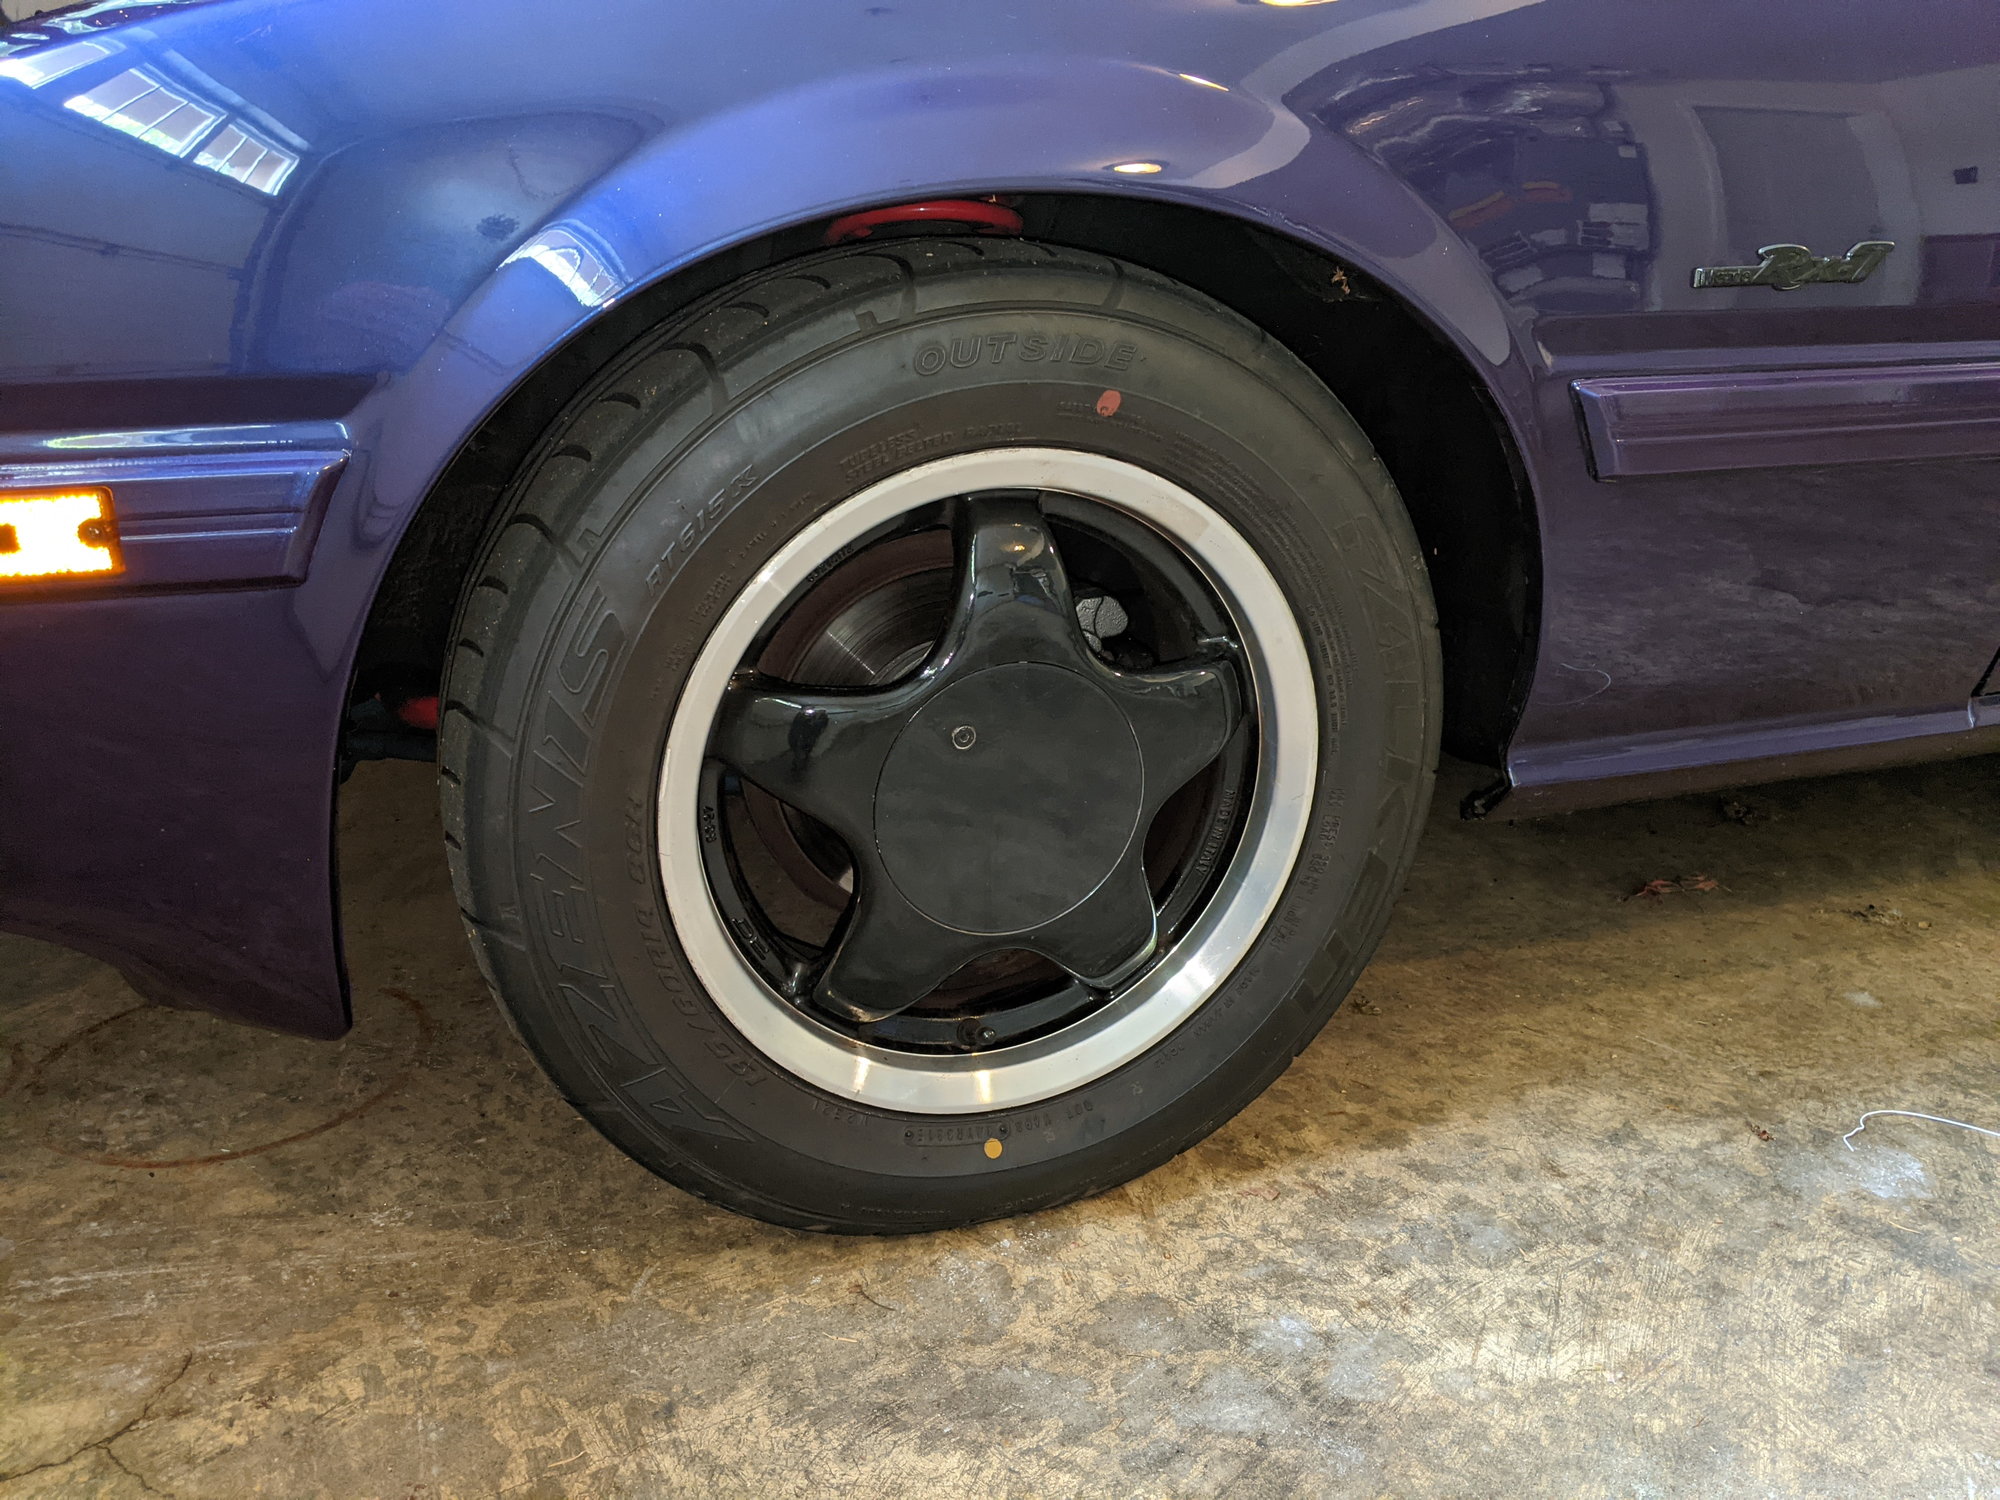 Wheels and Tires/Axles - RG Italian 14" Wheels and Falken Azenis RT615K tires - Used - 1978 to 1985 Mazda RX-7 - Issaquah, WA 98027, United States